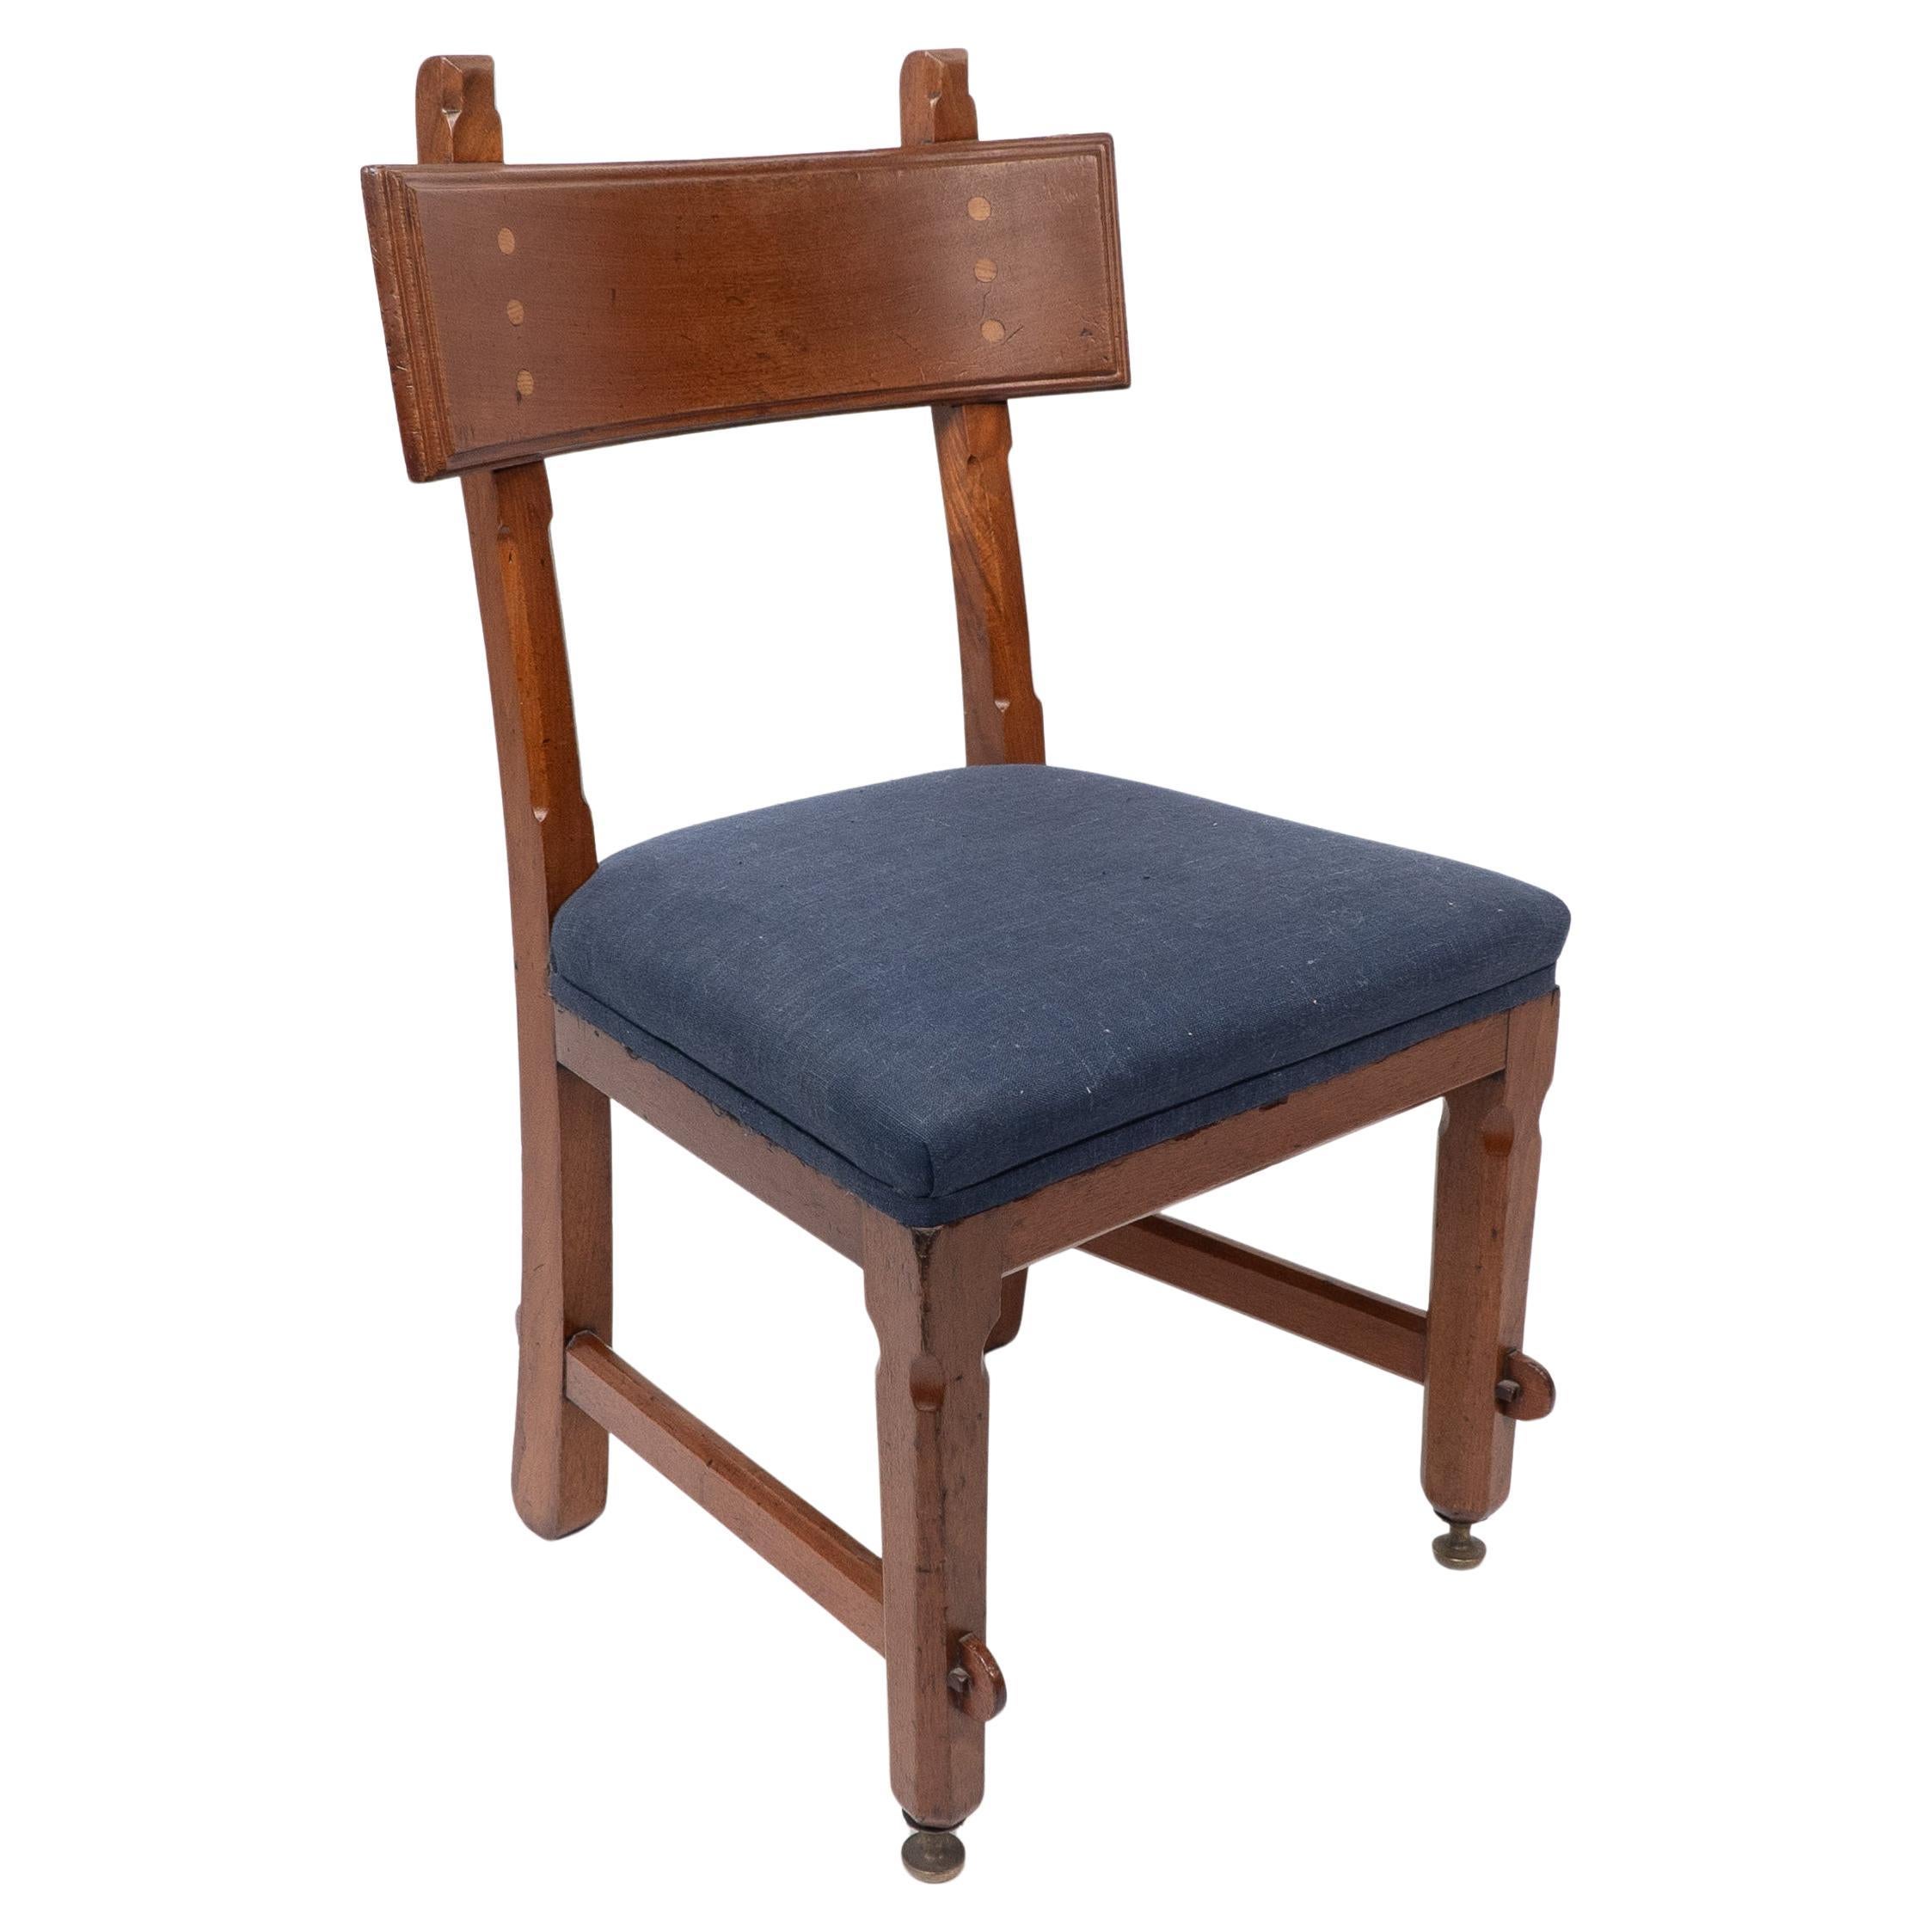 E W Pugin. A walnut side chair with curvaceous back rest with oak pegs For Sale